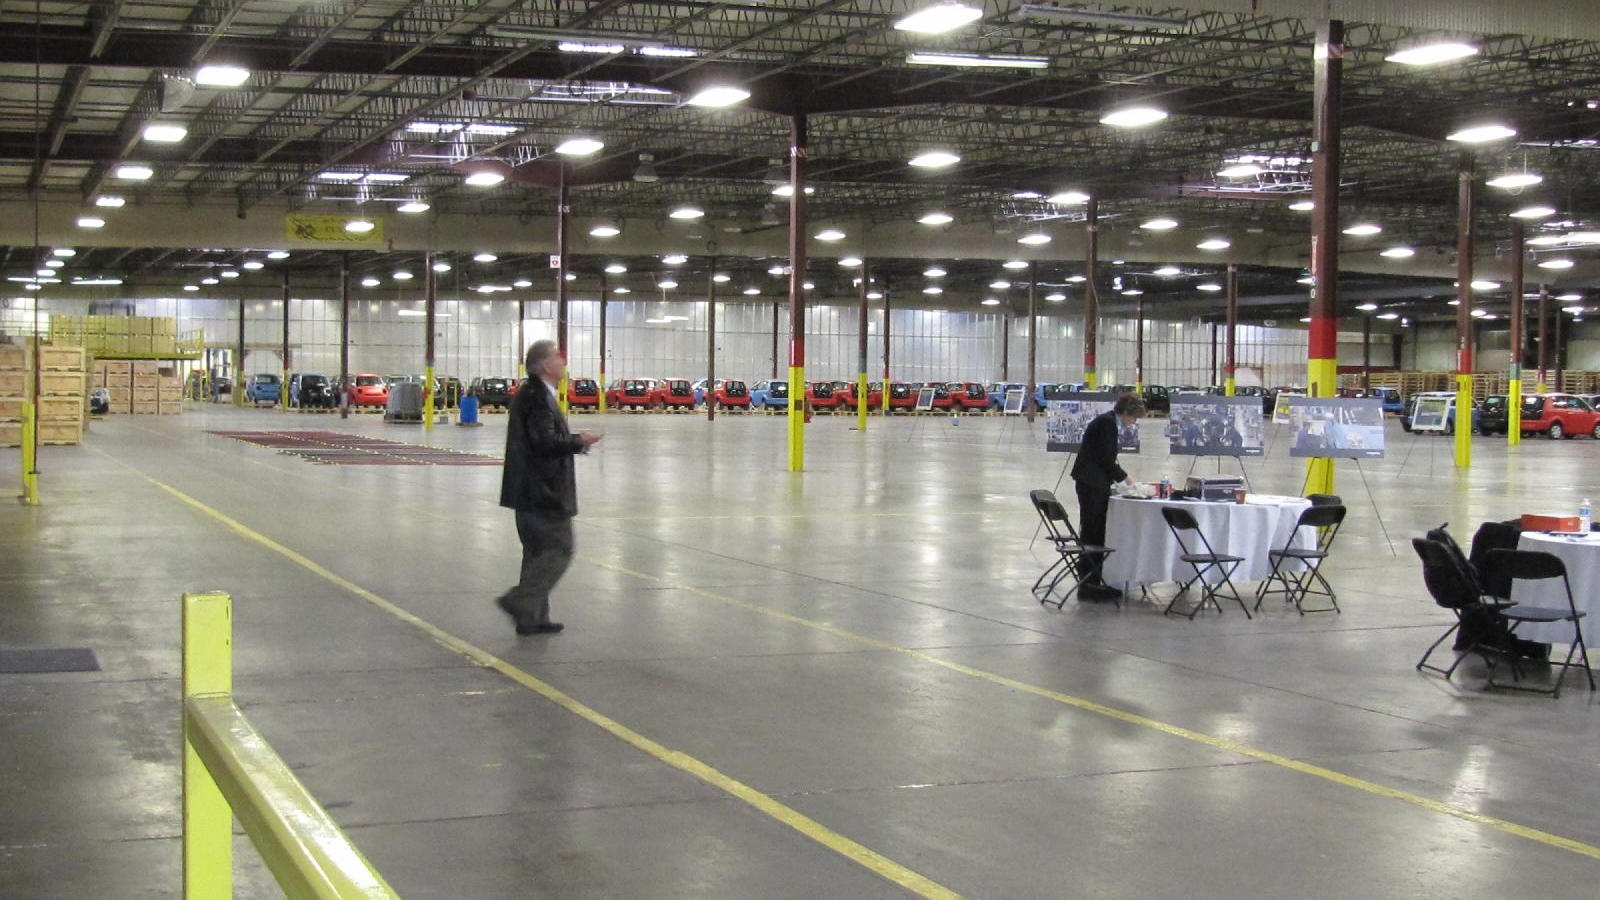 Assembly of Think City electric cars, Elkhart, Indiana, Jan 2011